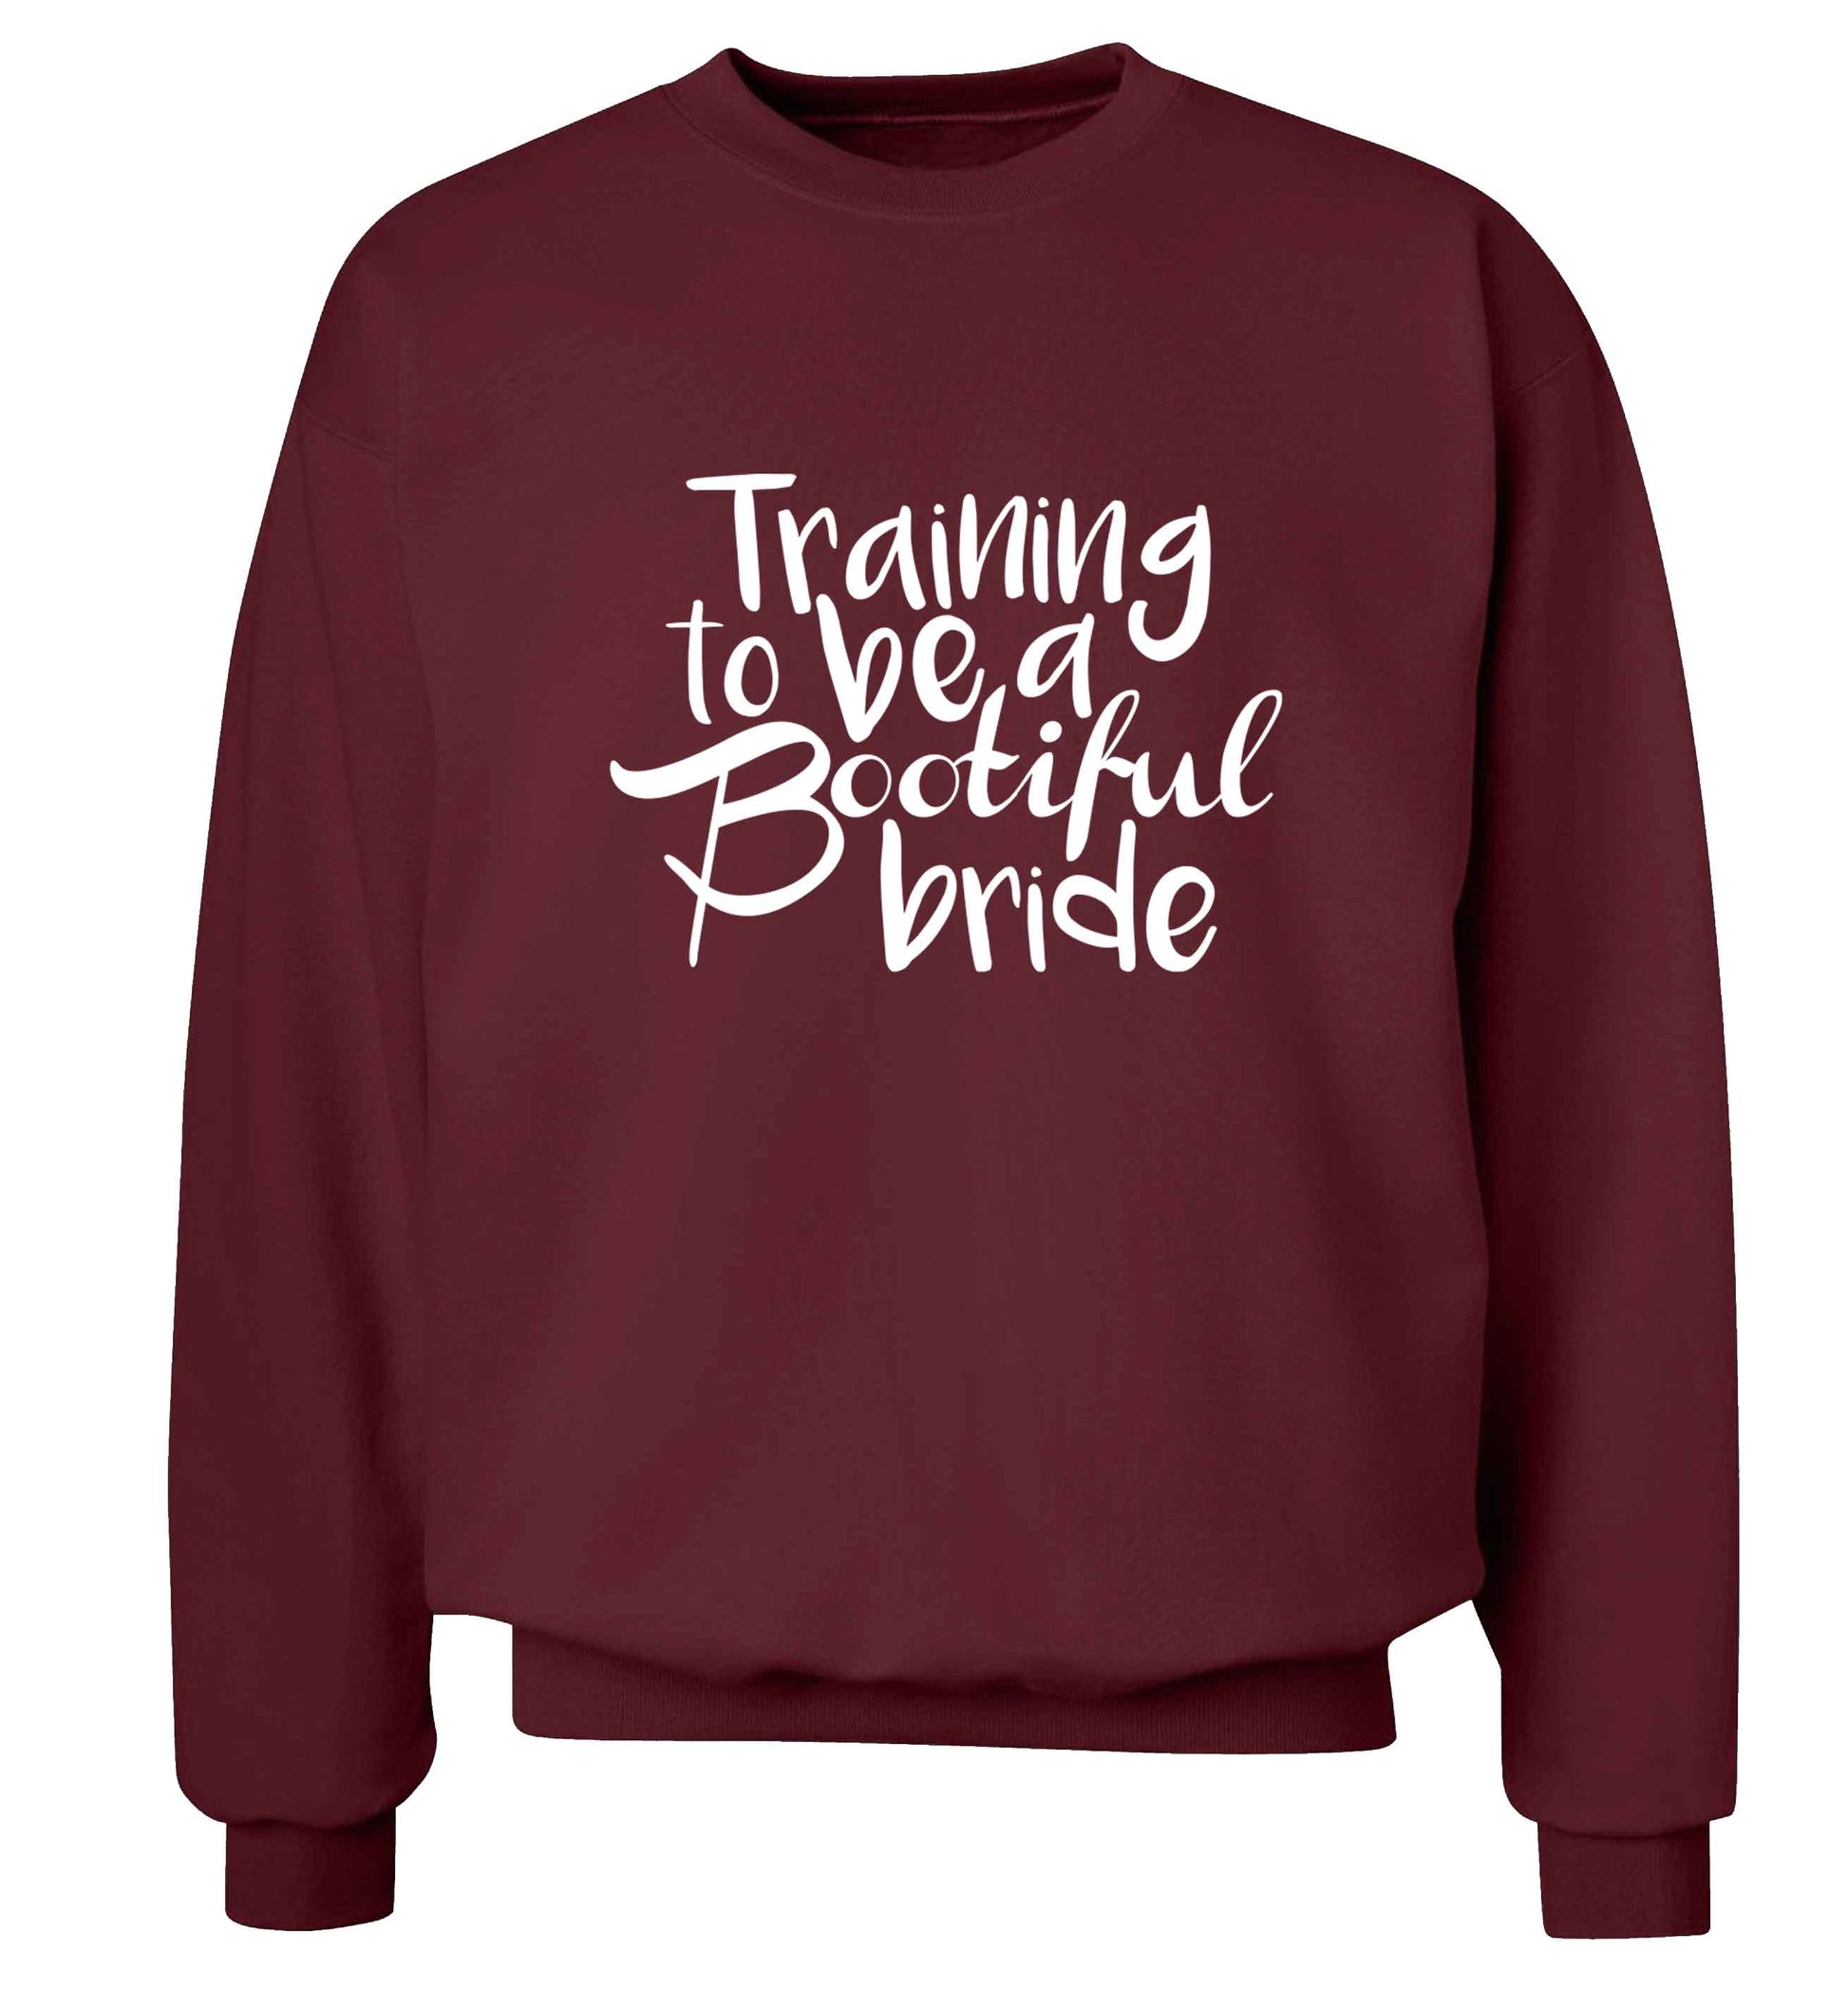 Get motivated and get fit for your big day! Our workout quotes and designs will get you ready to sweat! Perfect for any bride, groom or bridesmaid to be!  adult's unisex maroon sweater 2XL